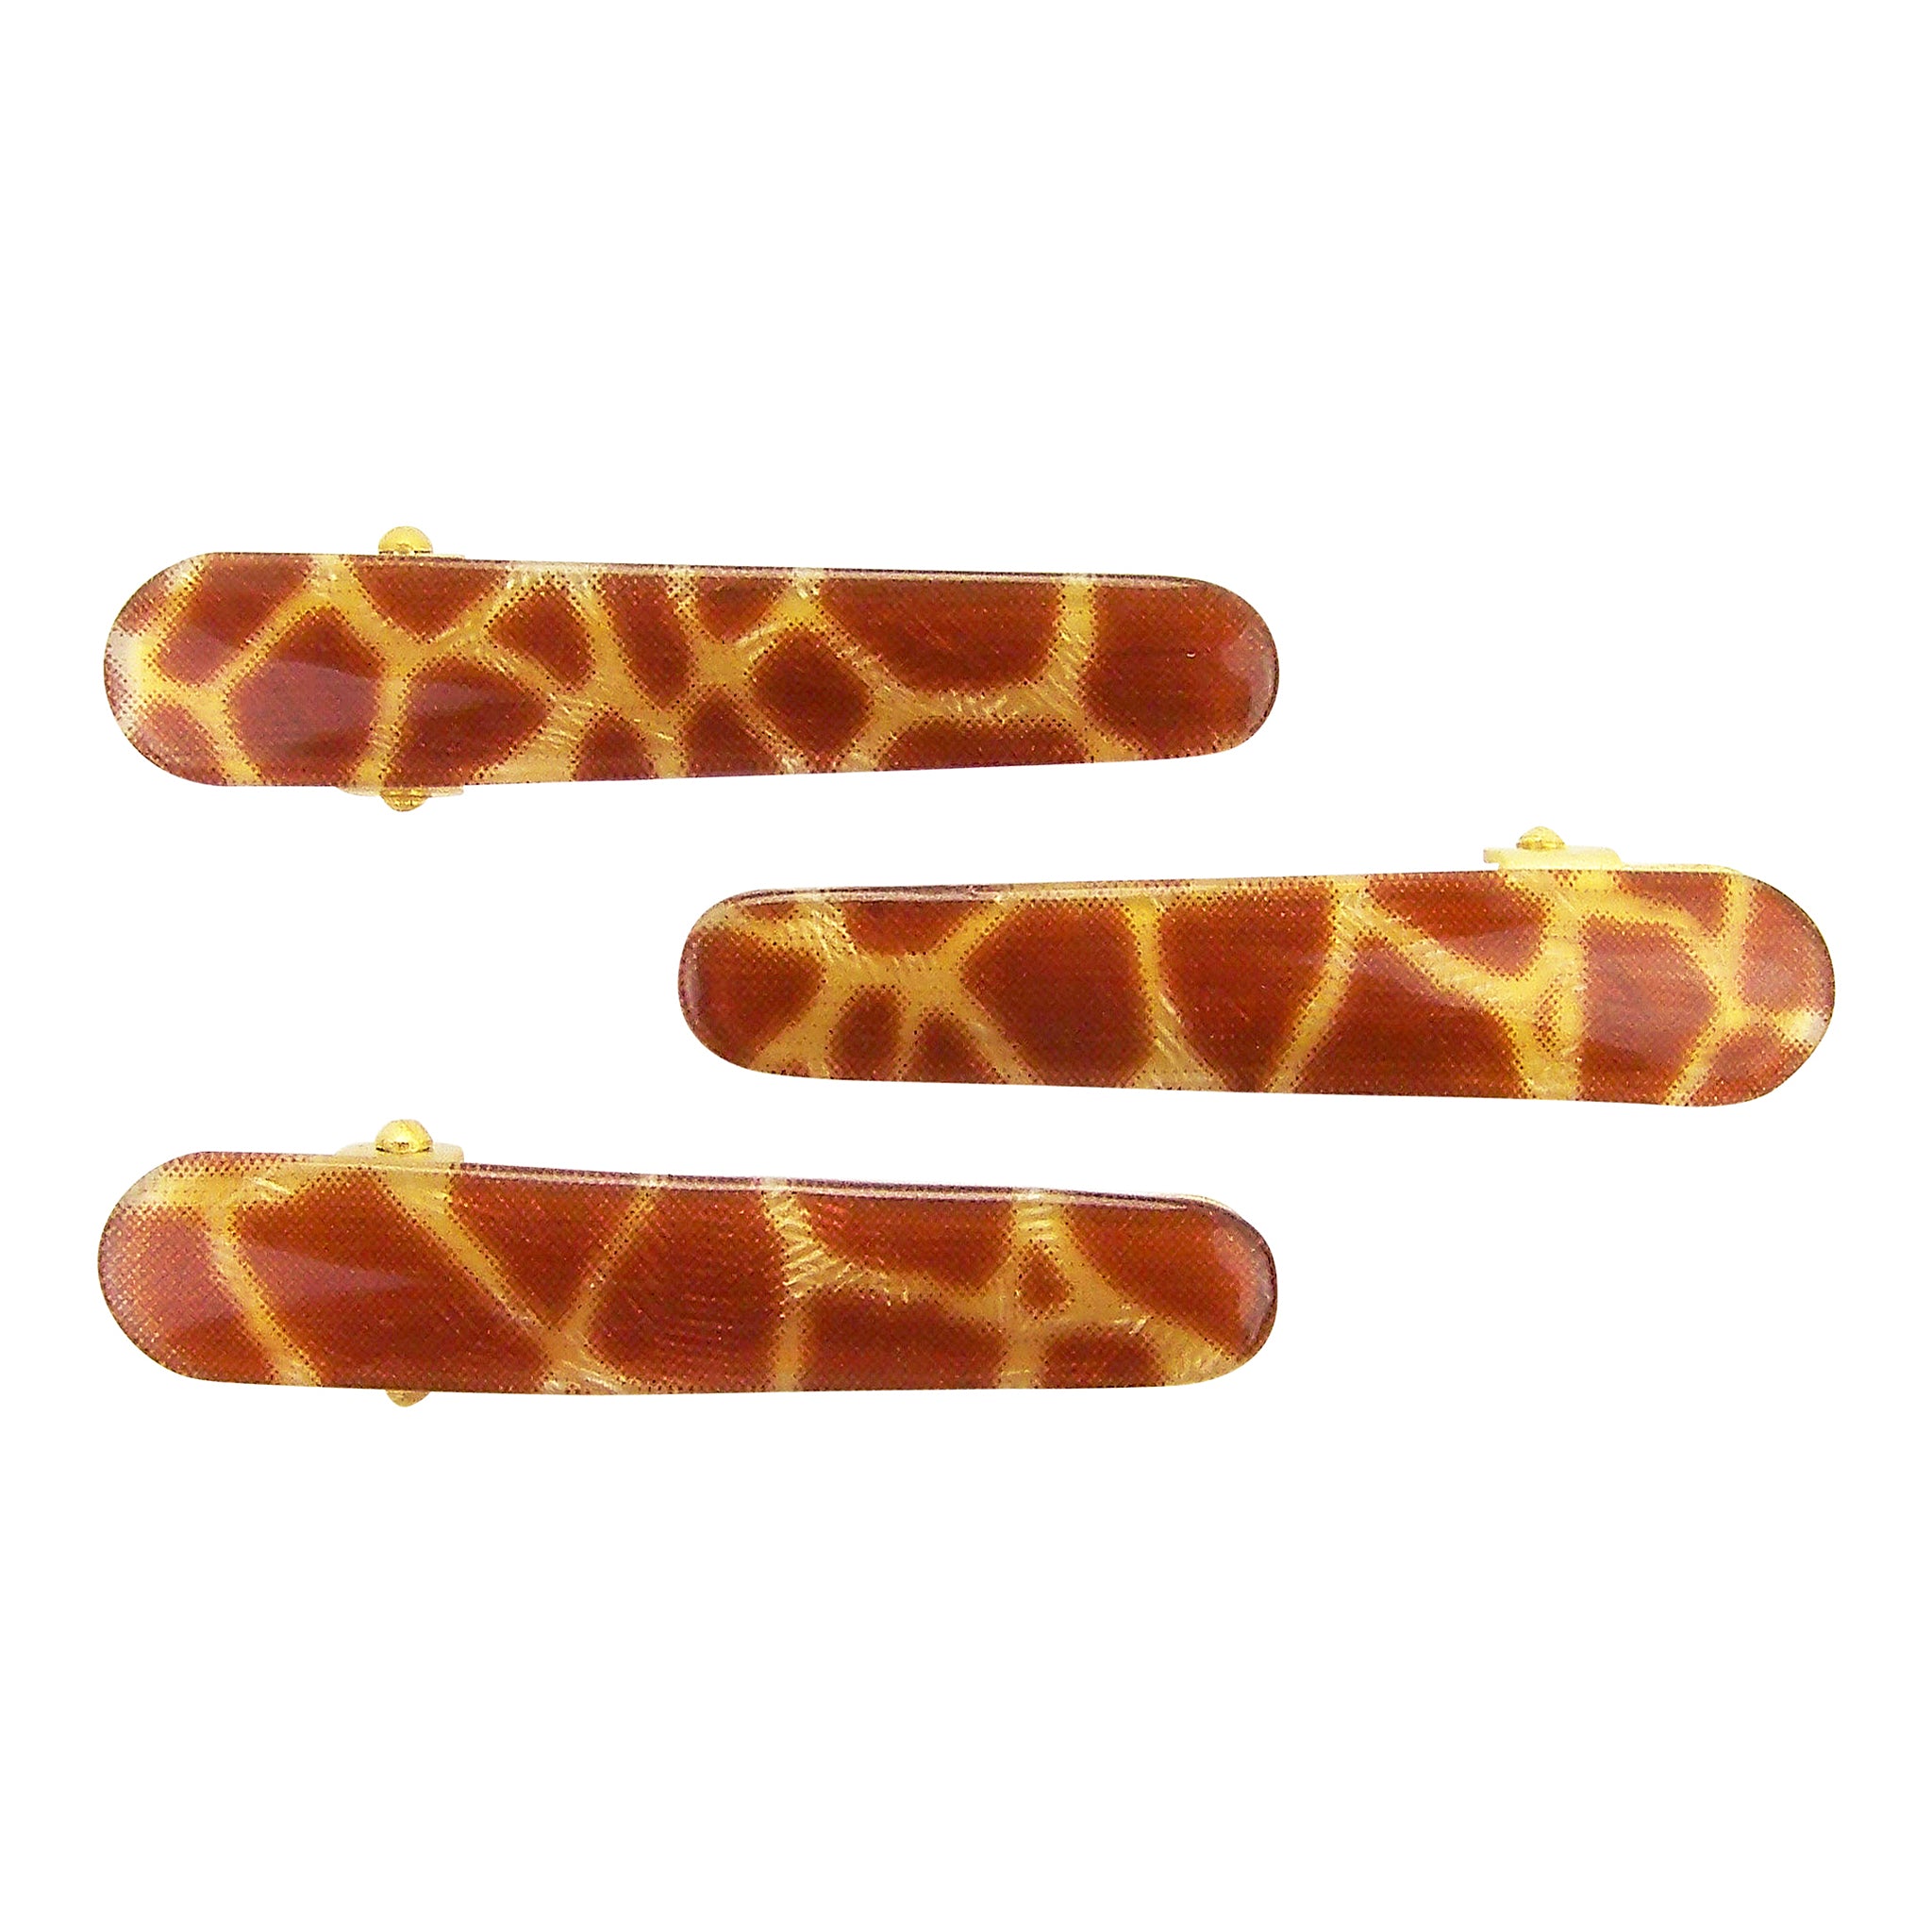 variation image of Ficcare Ficcaritos Hair Clip in Giraffe and Gold Plated